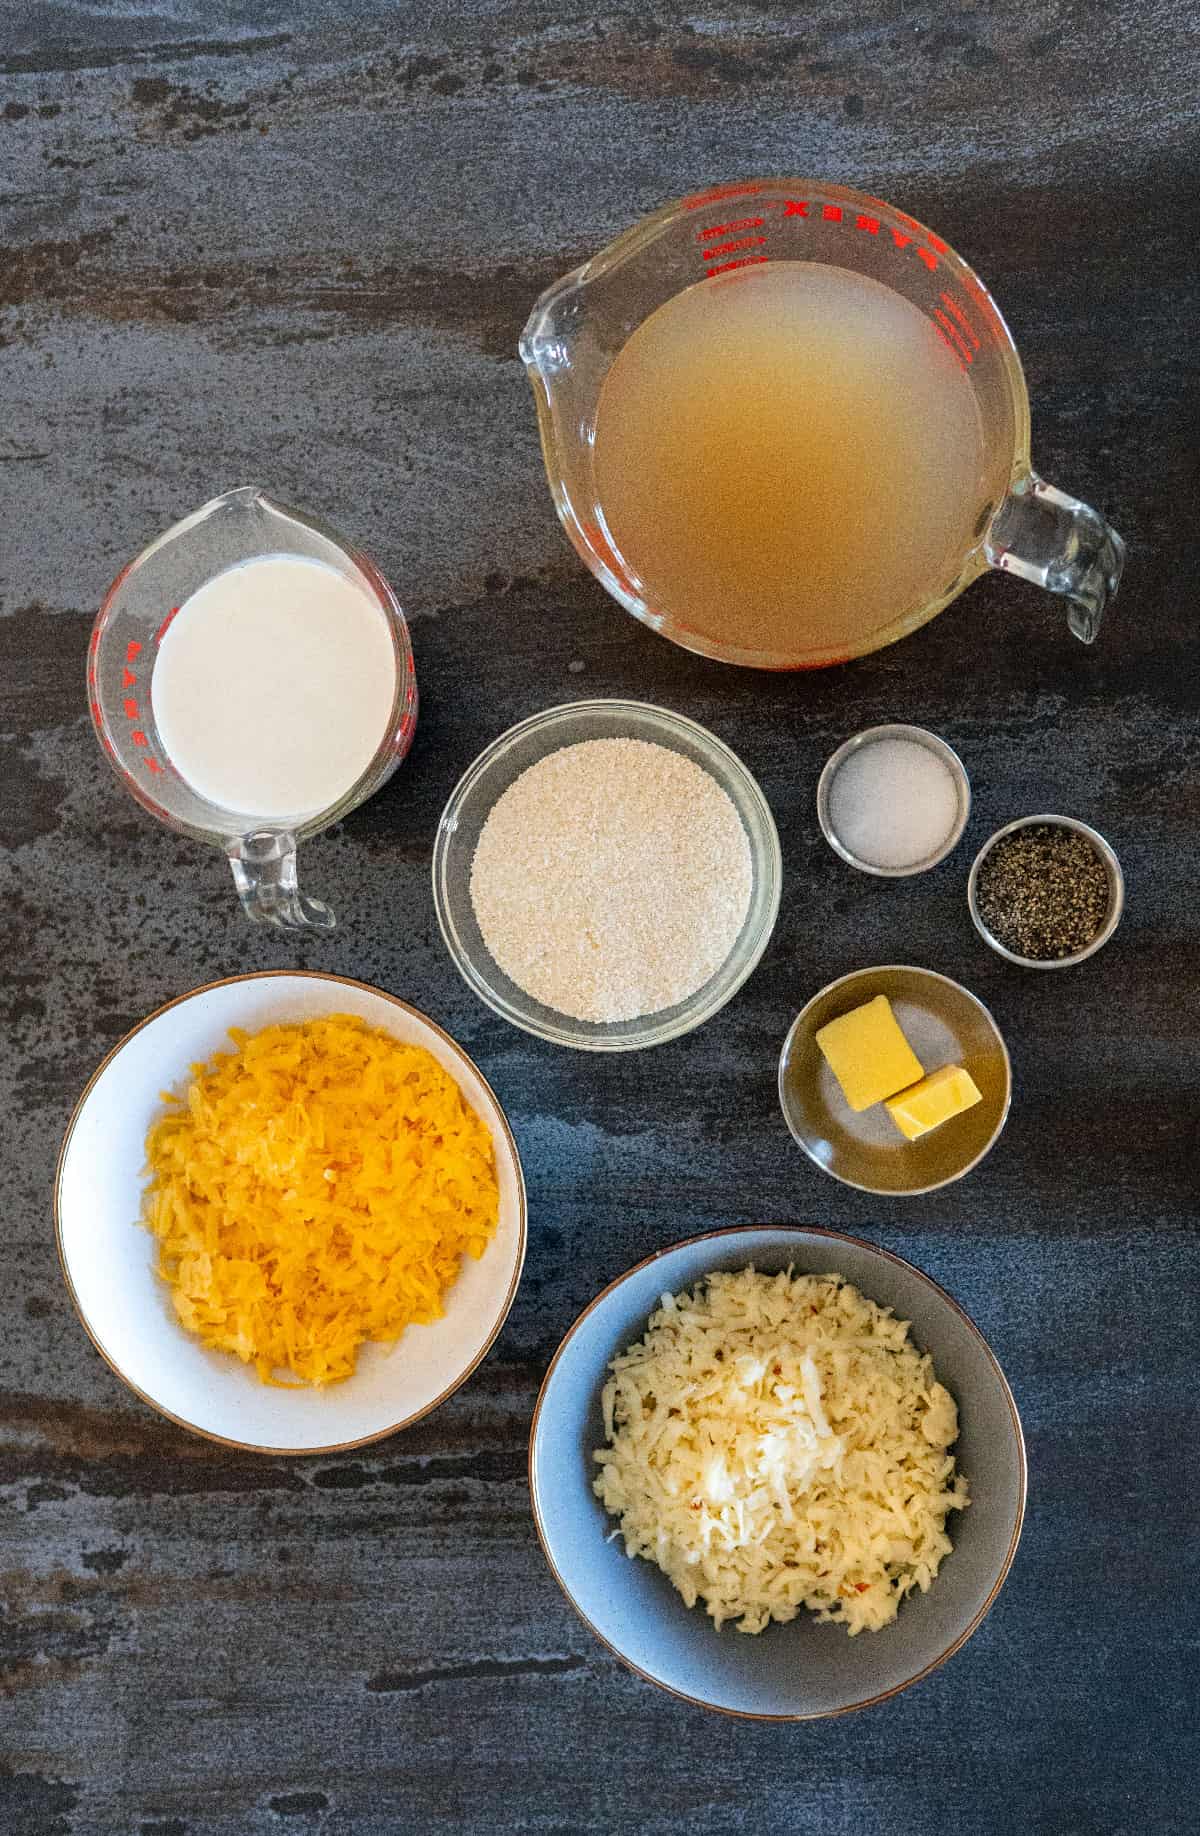 cheese grits ingredients: chicken broth, cream, grits, salt, pepper, butter, shredded cheeses.